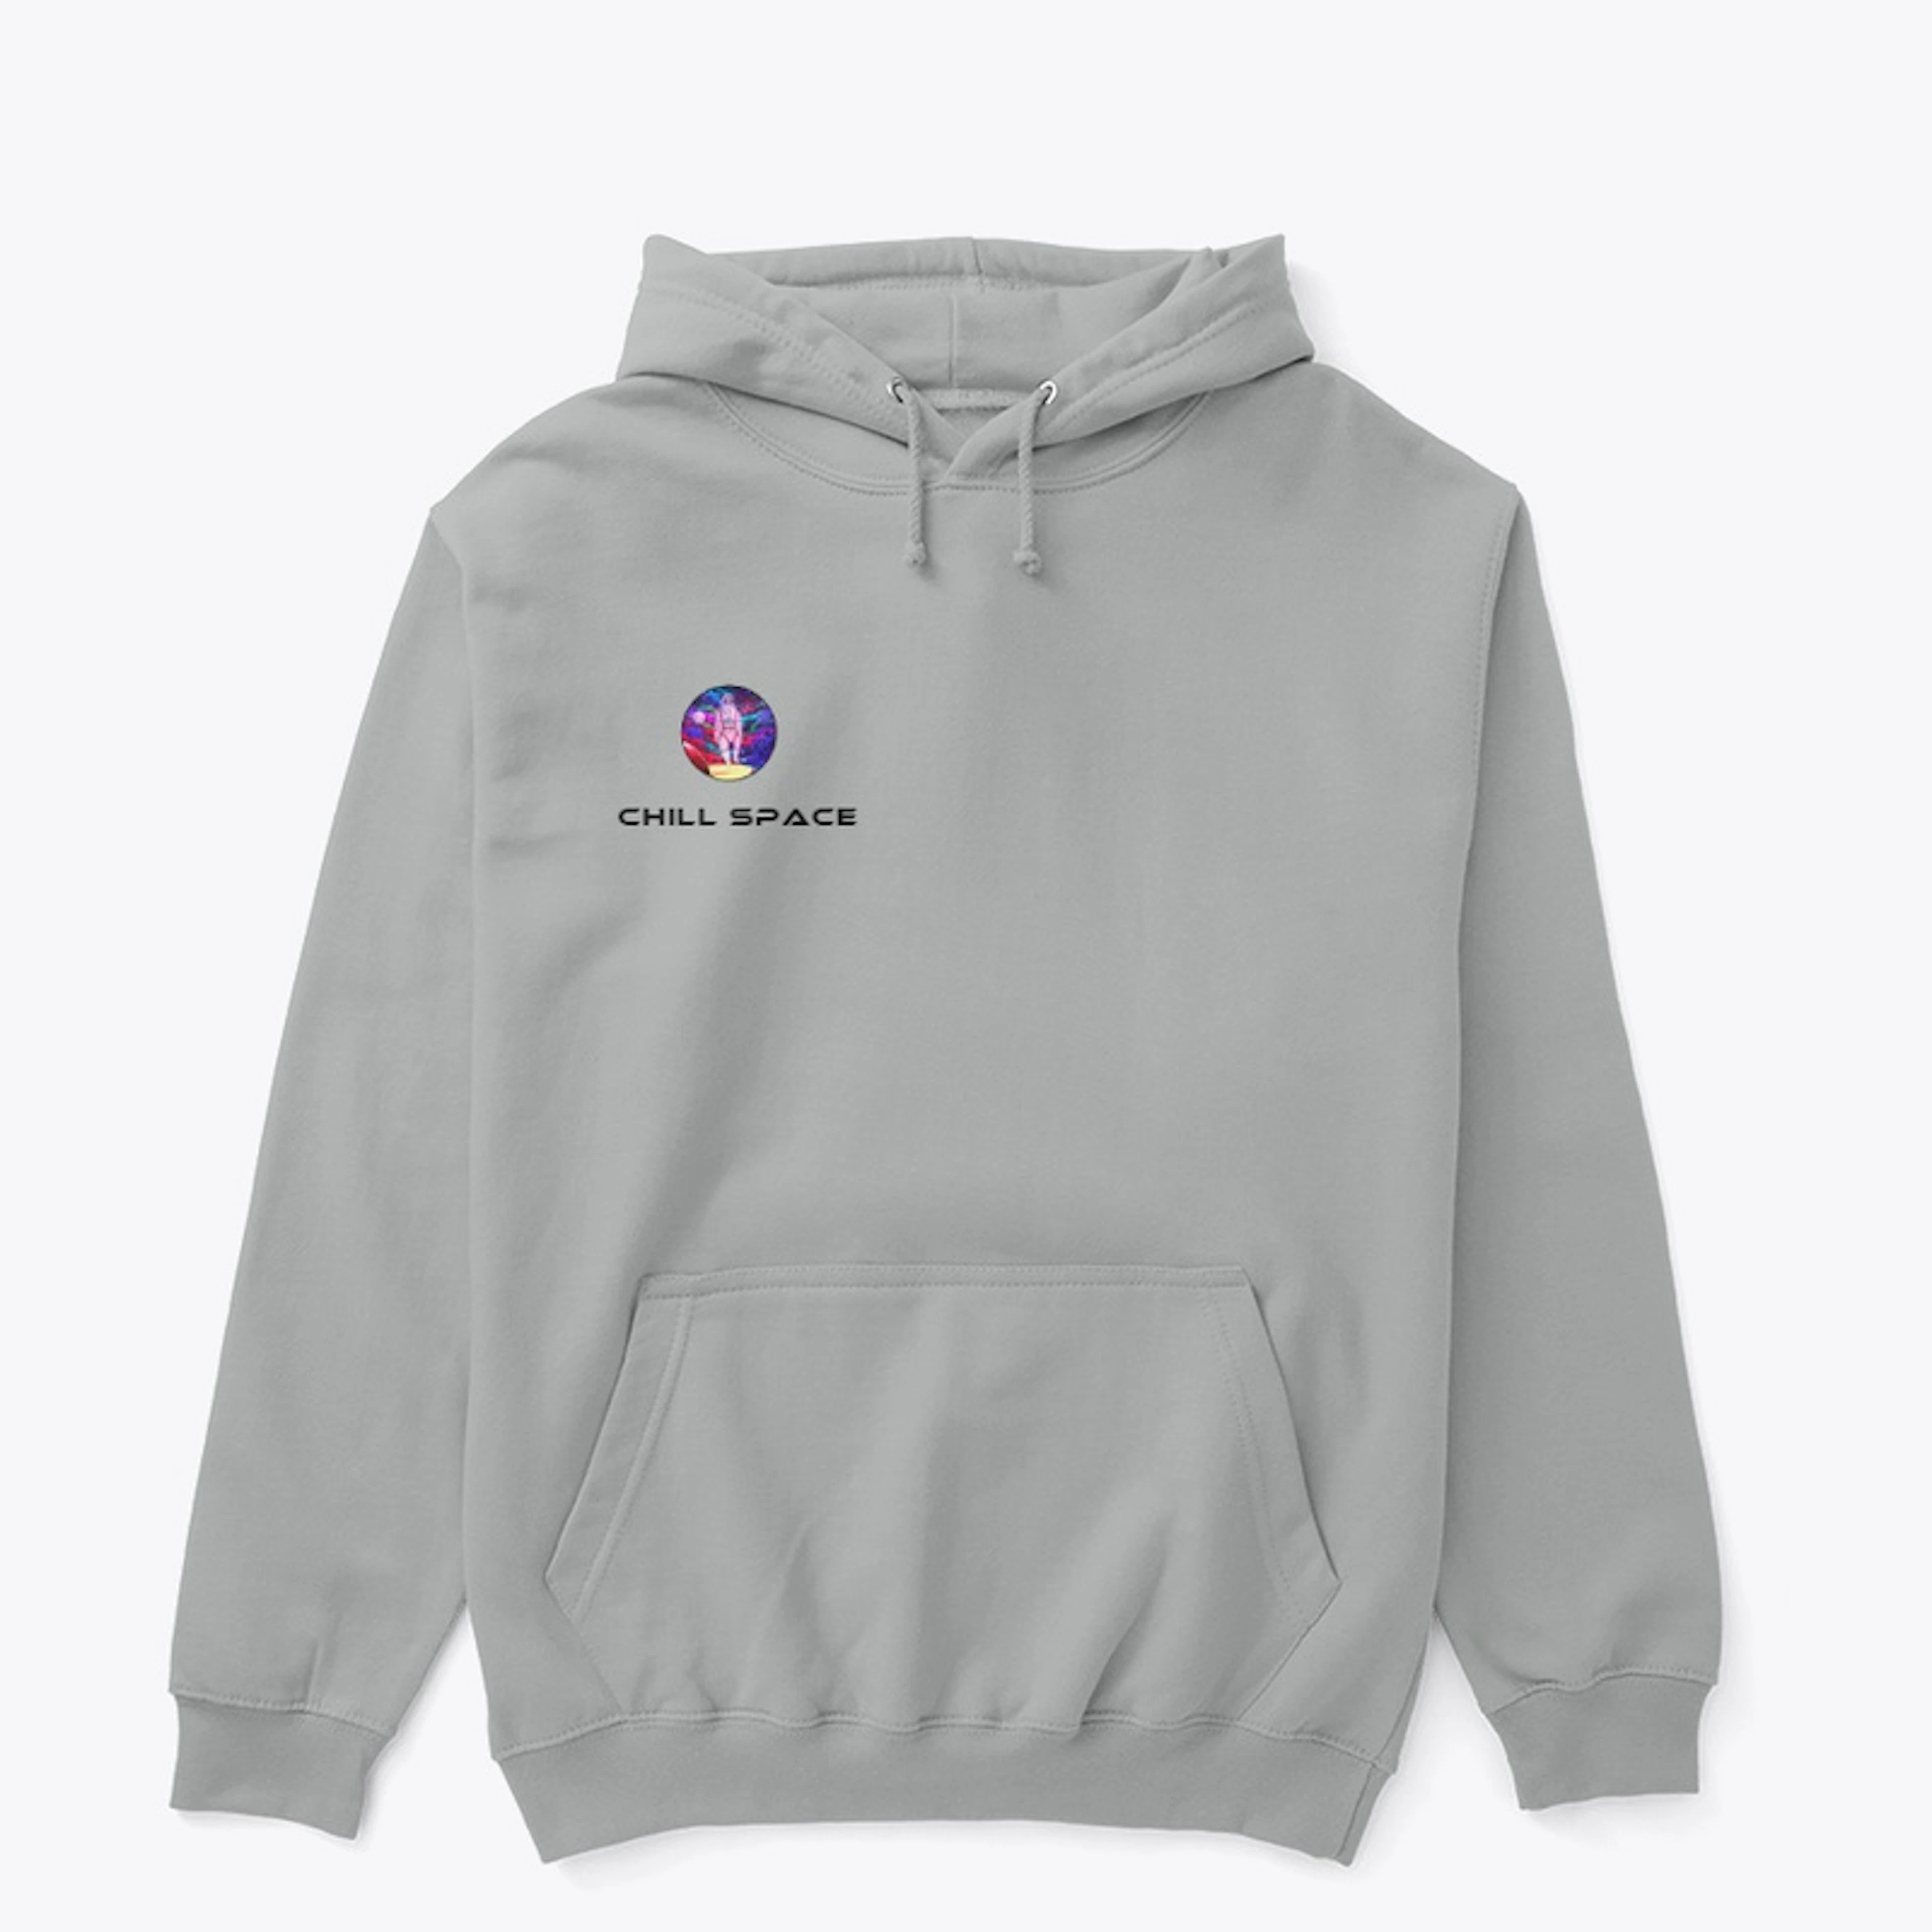 Chill space Hoodie